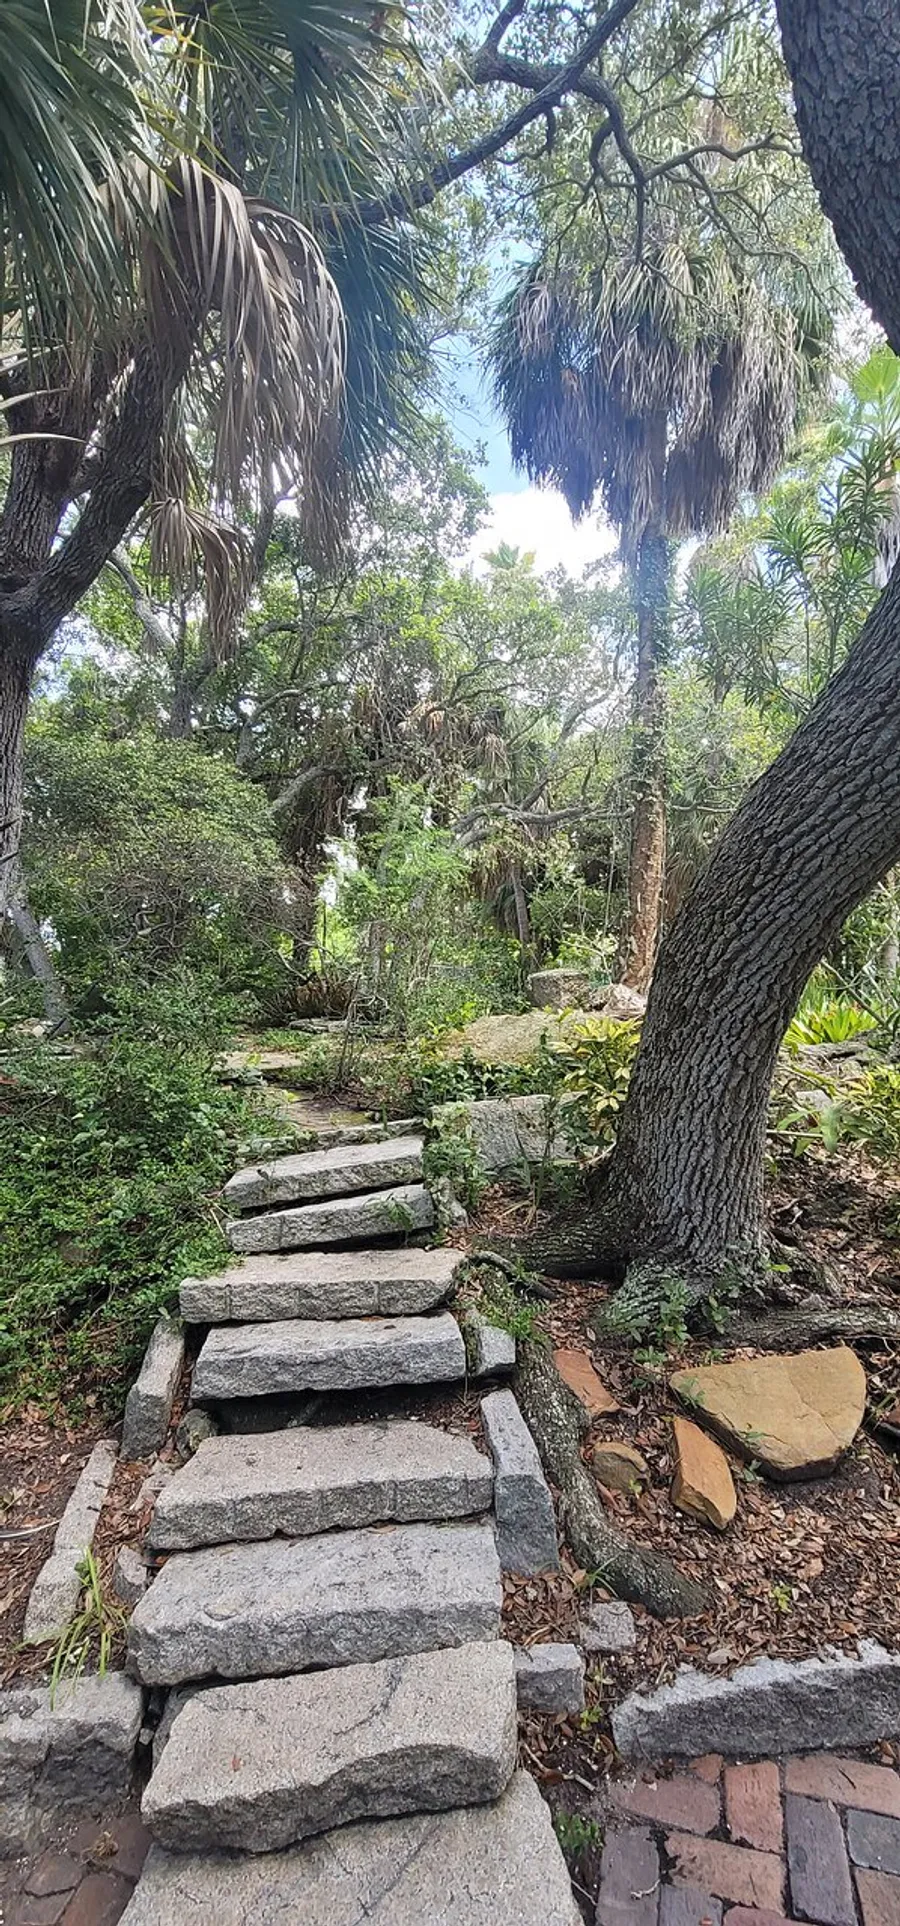 A stone pathway leads through a lush, green garden filled with trees and plants, evoking a serene natural environment.